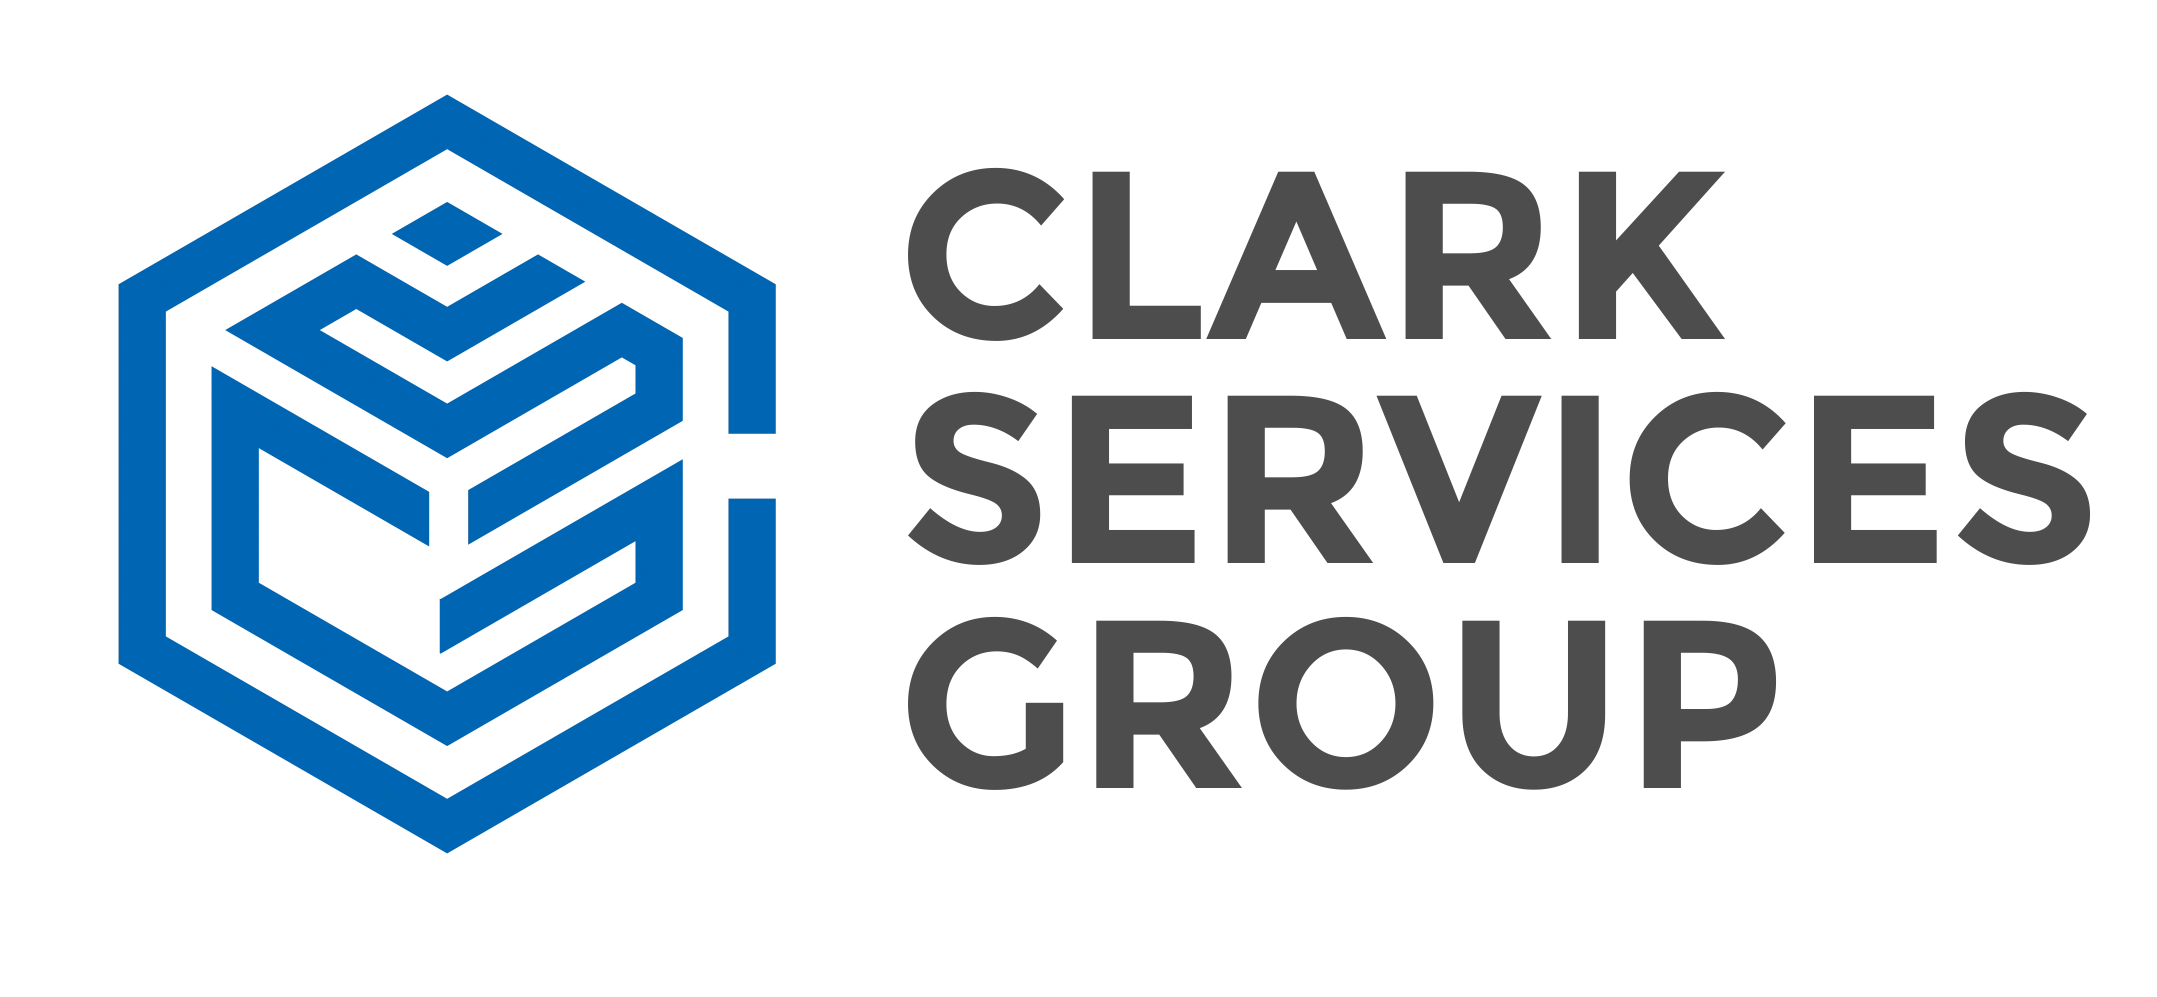 (c) Clarkservices.group